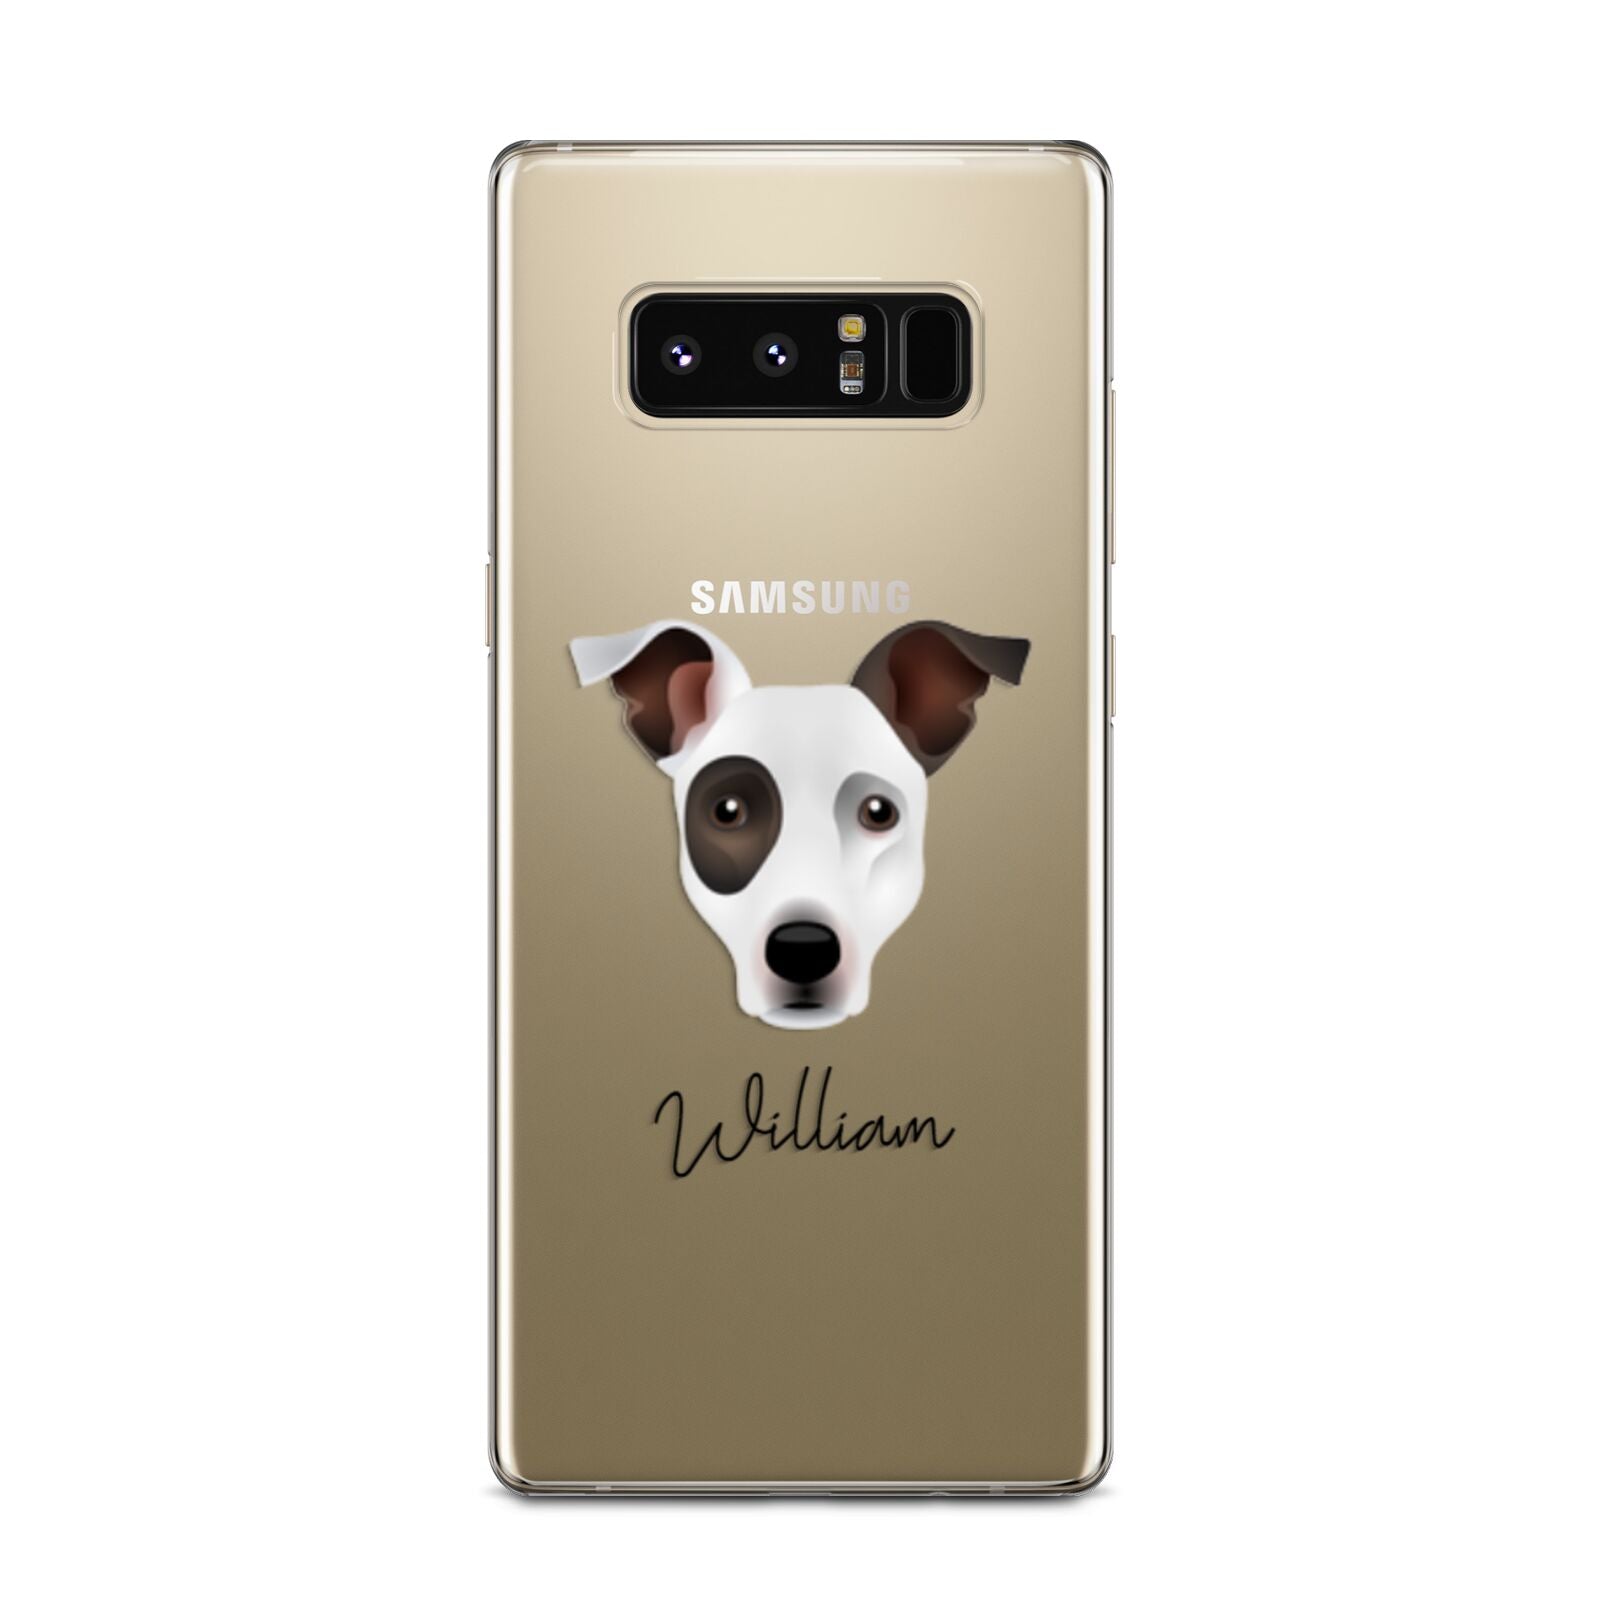 Staffy Jack Personalised Samsung Galaxy Note 8 Case